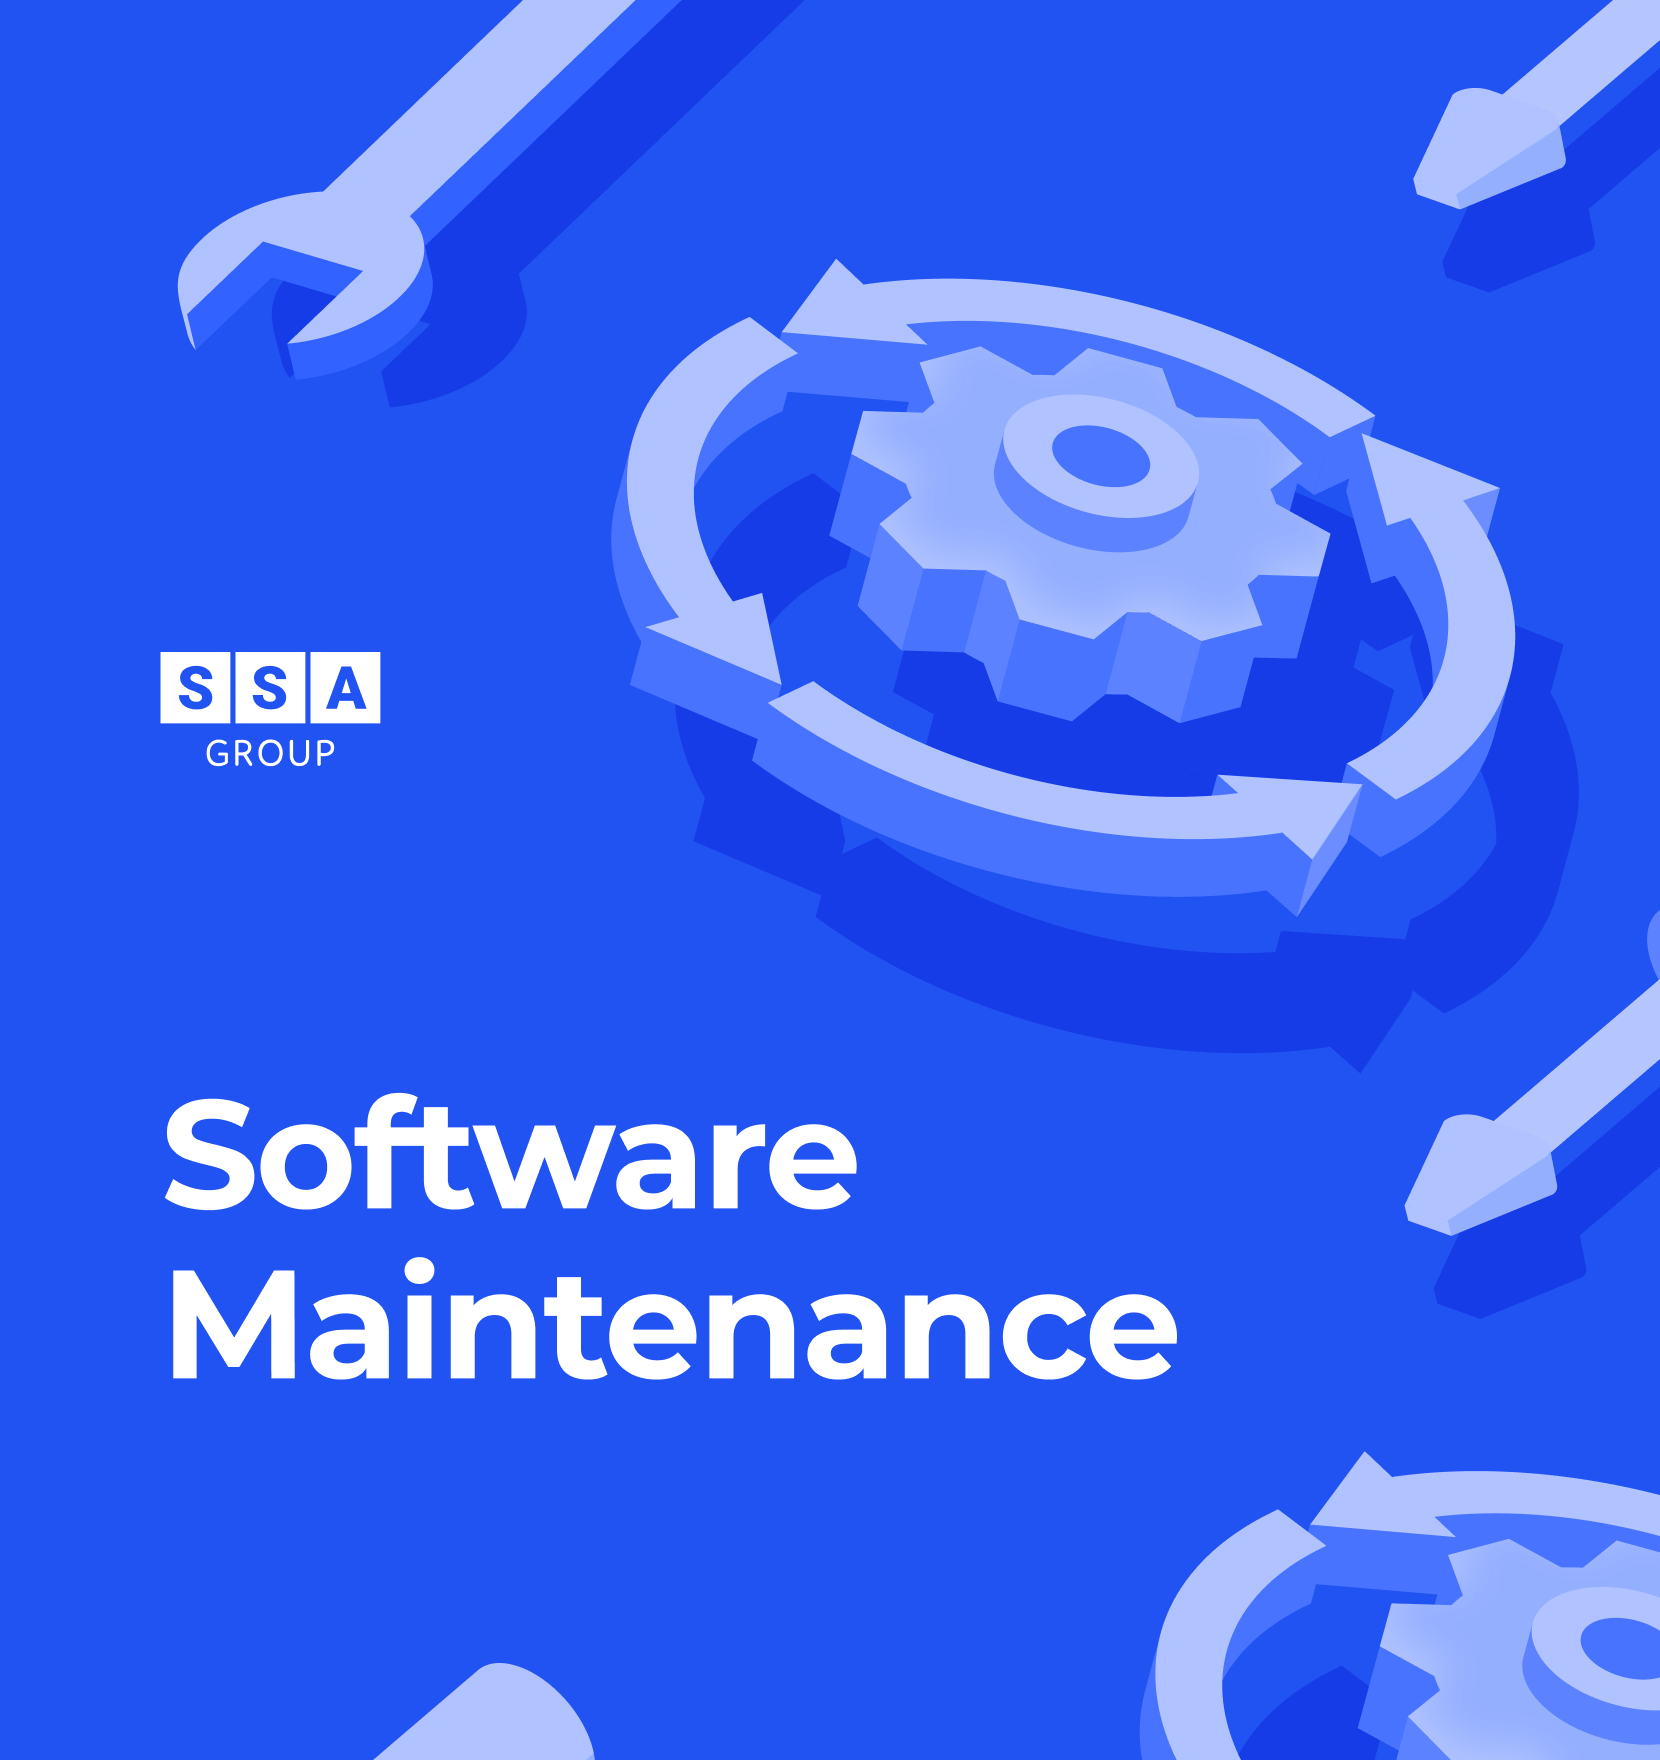 SSA Group launches a new professional service - Software Maintenance 